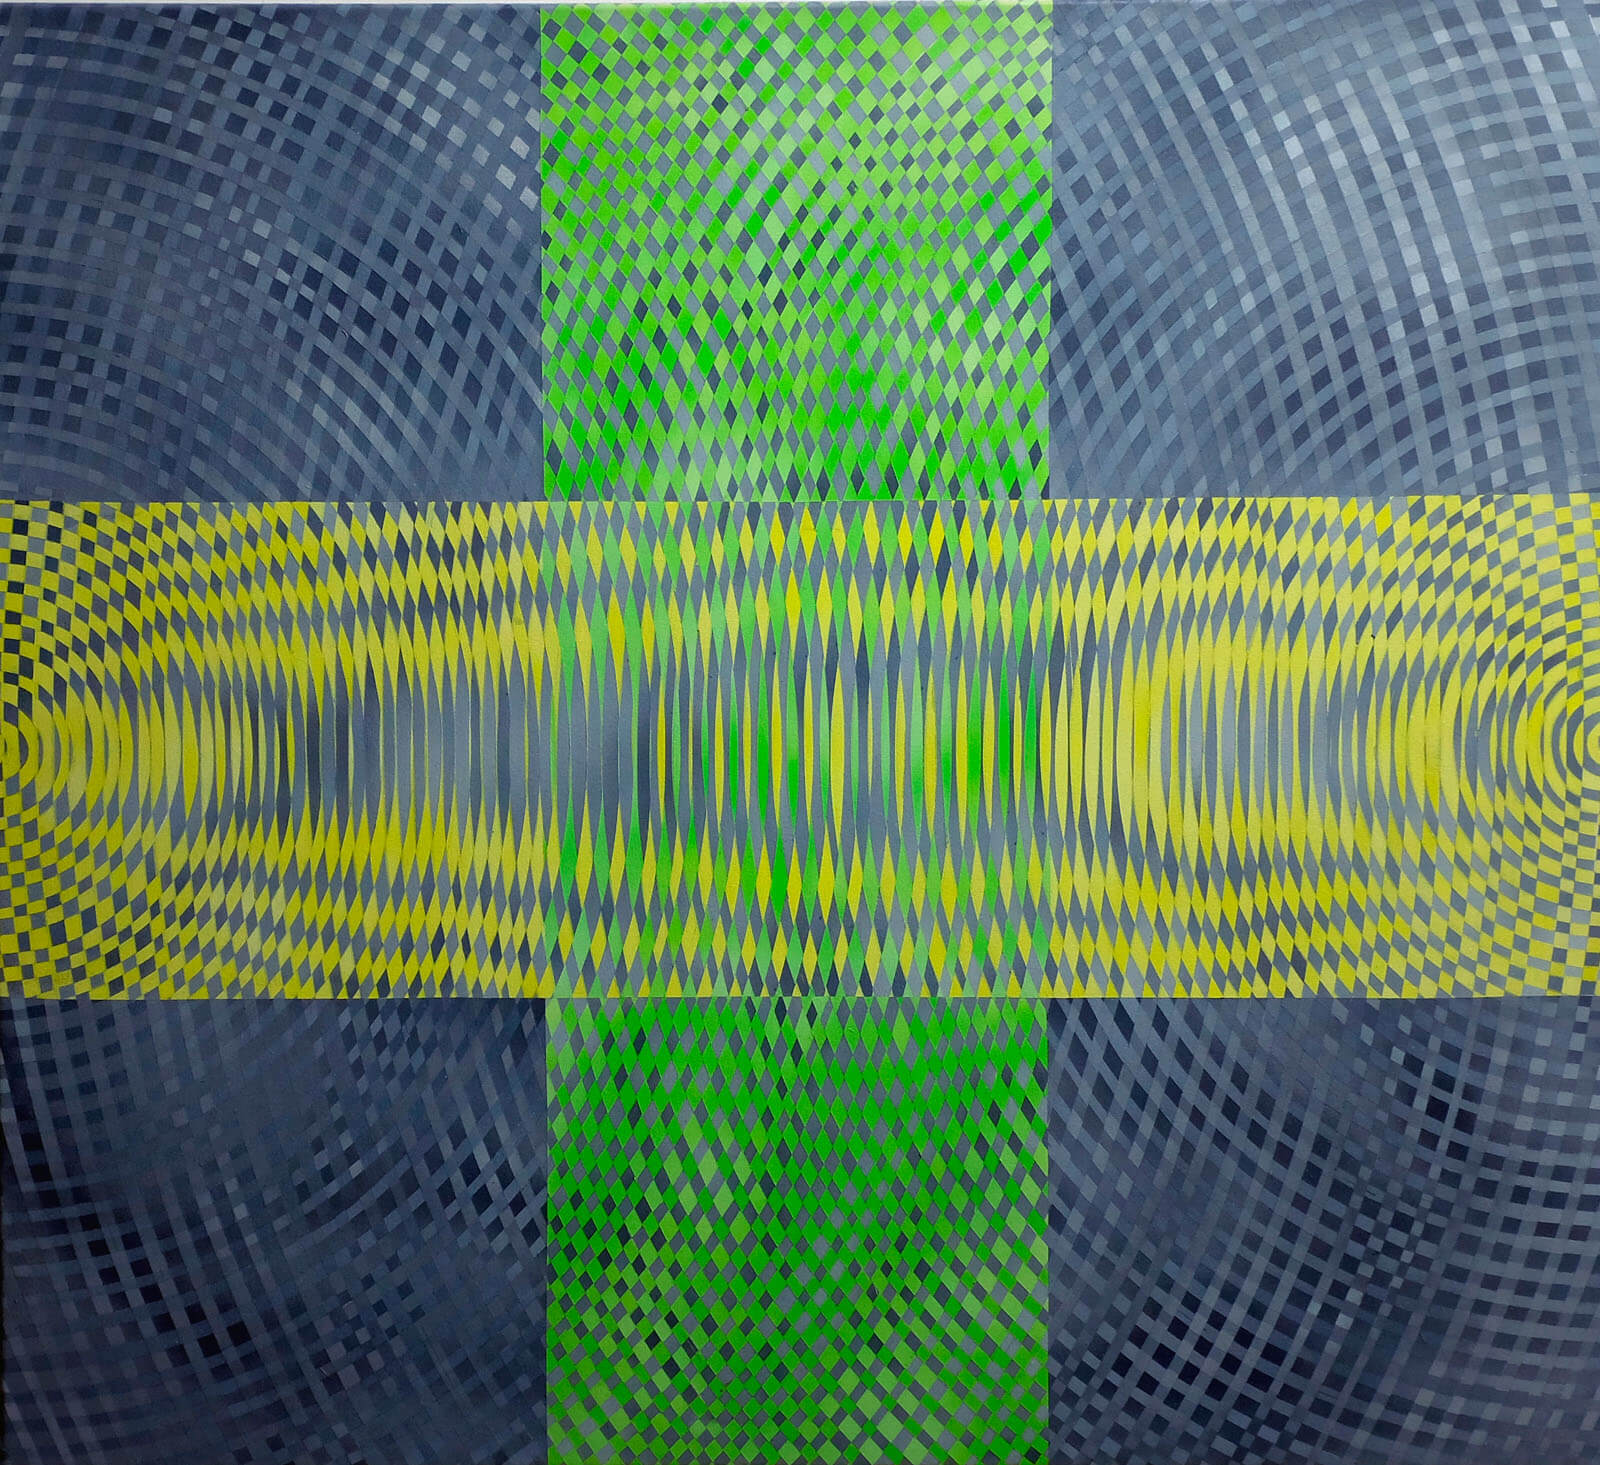 sonic-intersection-no.3-acrylic-on-canvas-97x107cm-2008